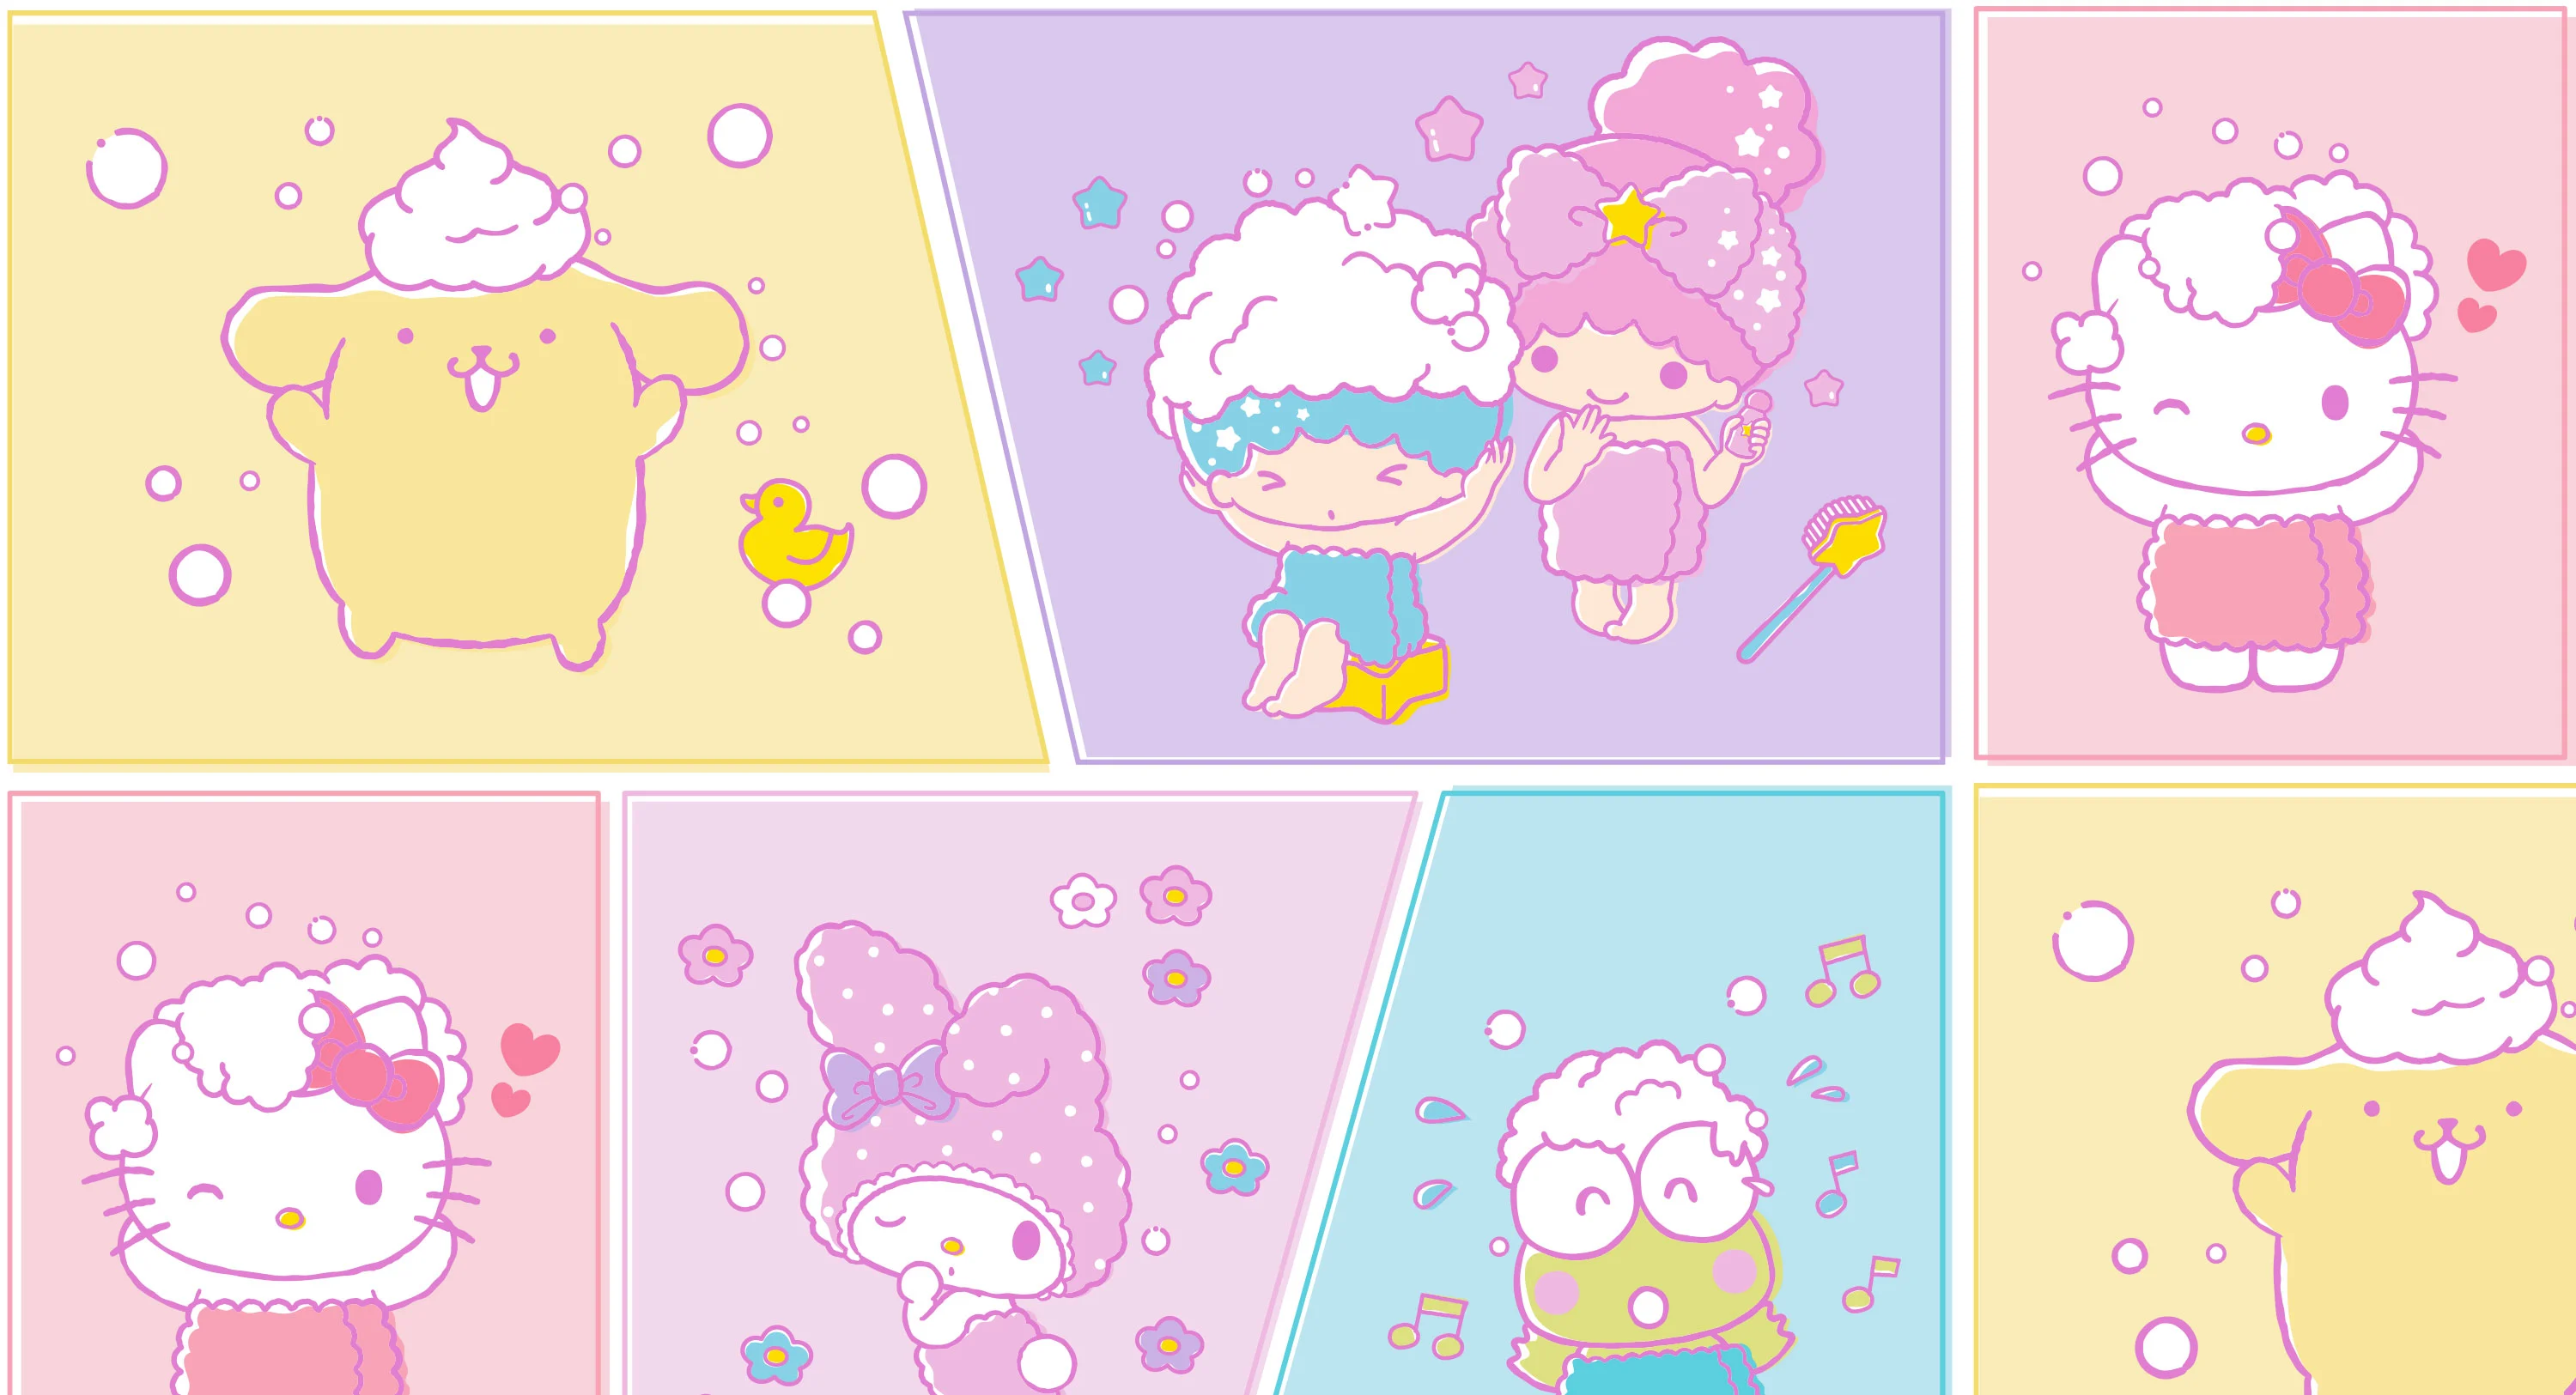 Hello Kitty And Her Friends Wallpapers  Wallpaper Cave